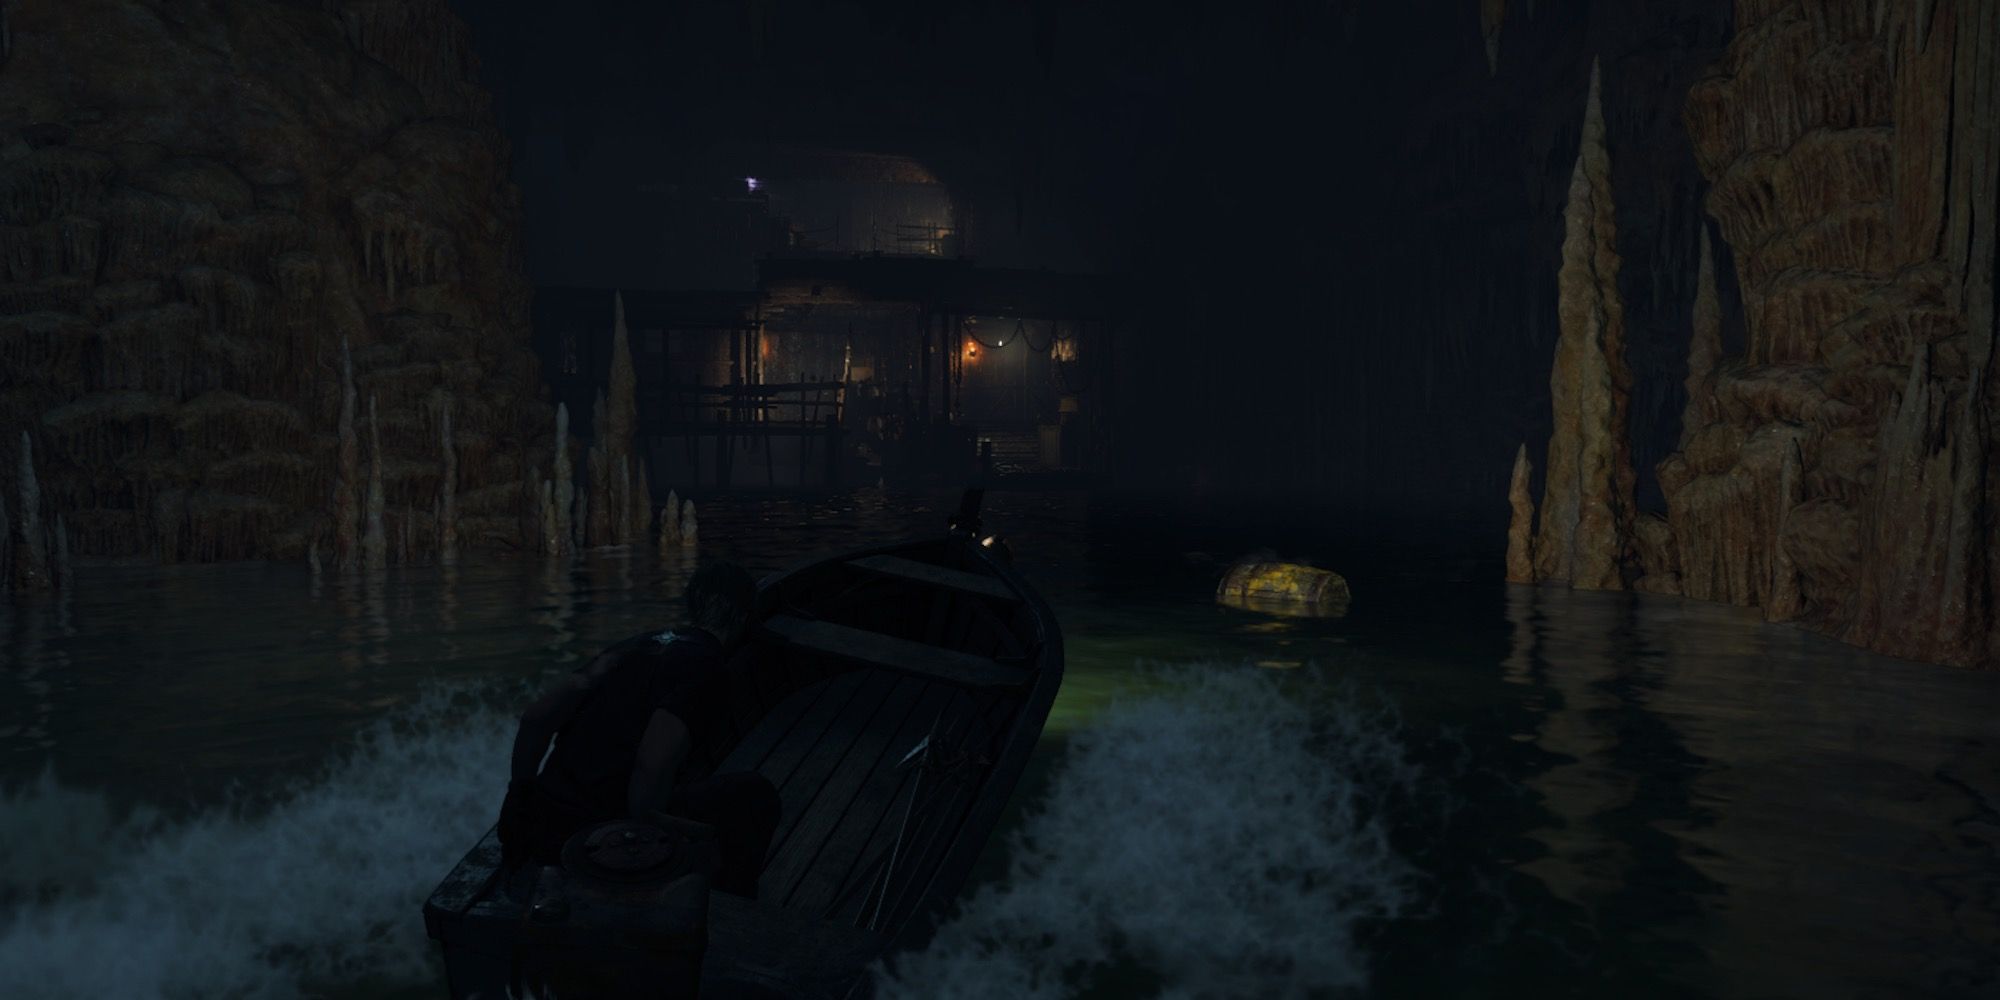 Exploring in the boat in the Resident Evil 4 remake